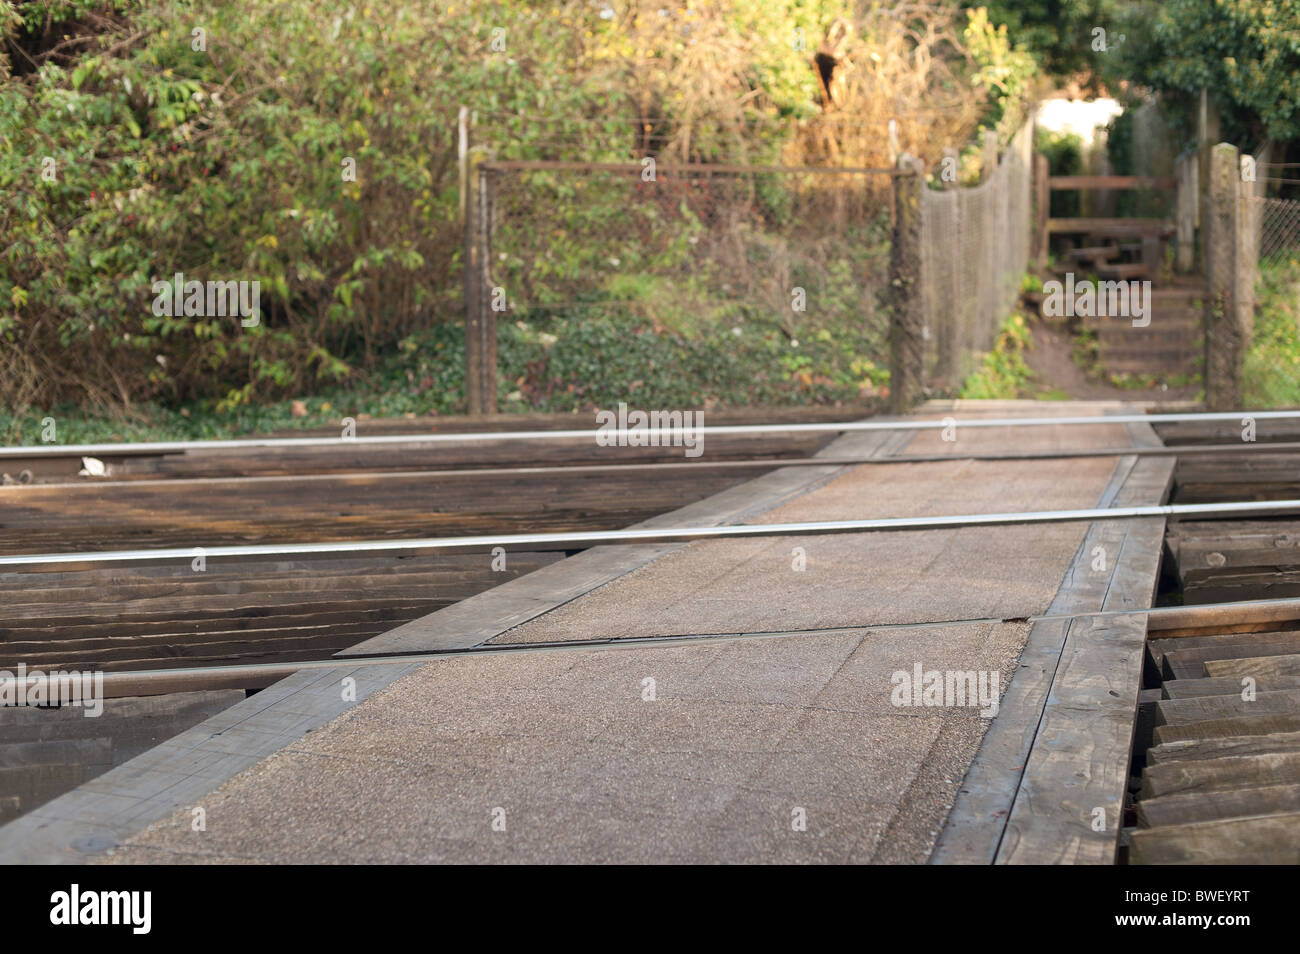 Unmanned pedestrian railway crossing footpath warning signs South eastern Trains Stock Photo